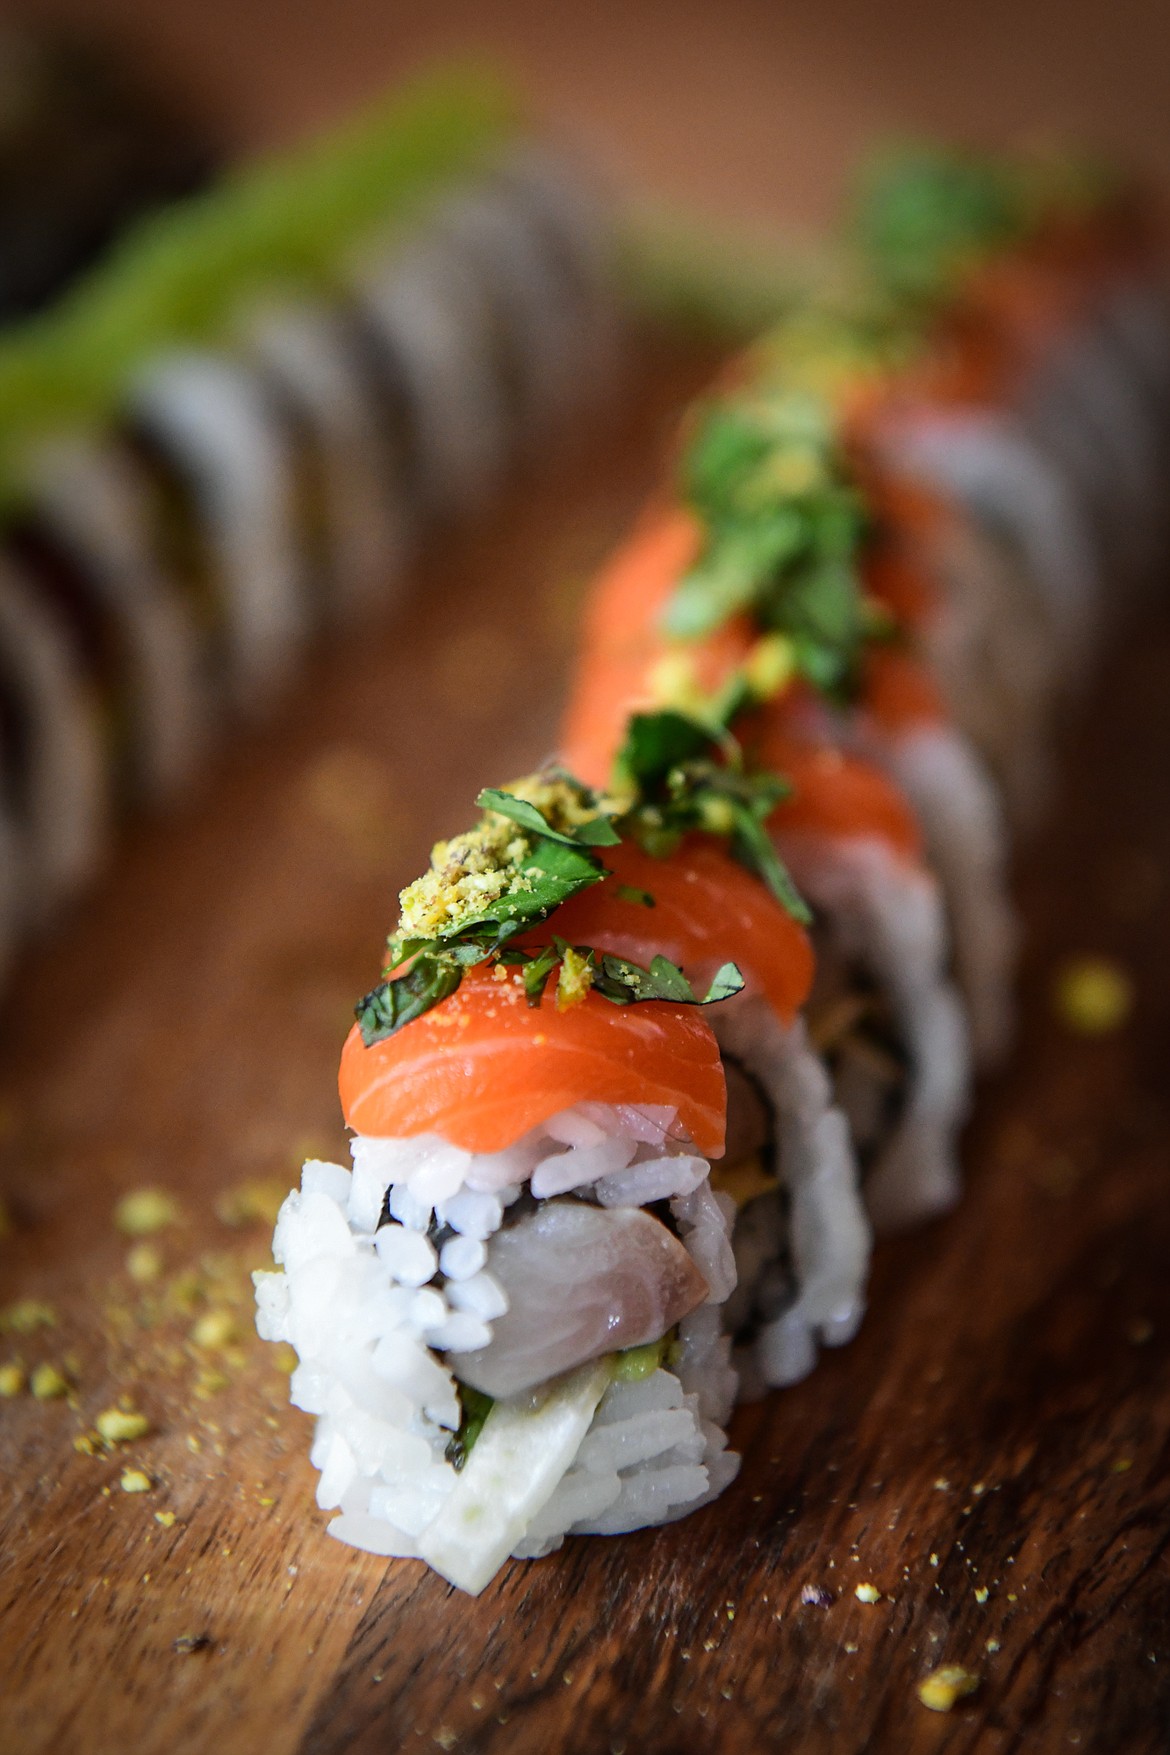 Lil' Chimmy sushi featuring king salmon, black cod, avocado, fennel, cilantro, lime, pistachio, rosé ponzu and 5 spice at Indah Sushi in Whitefish on Wednesday, Aug. 23. (Casey Kreider/Daily Inter Lake)